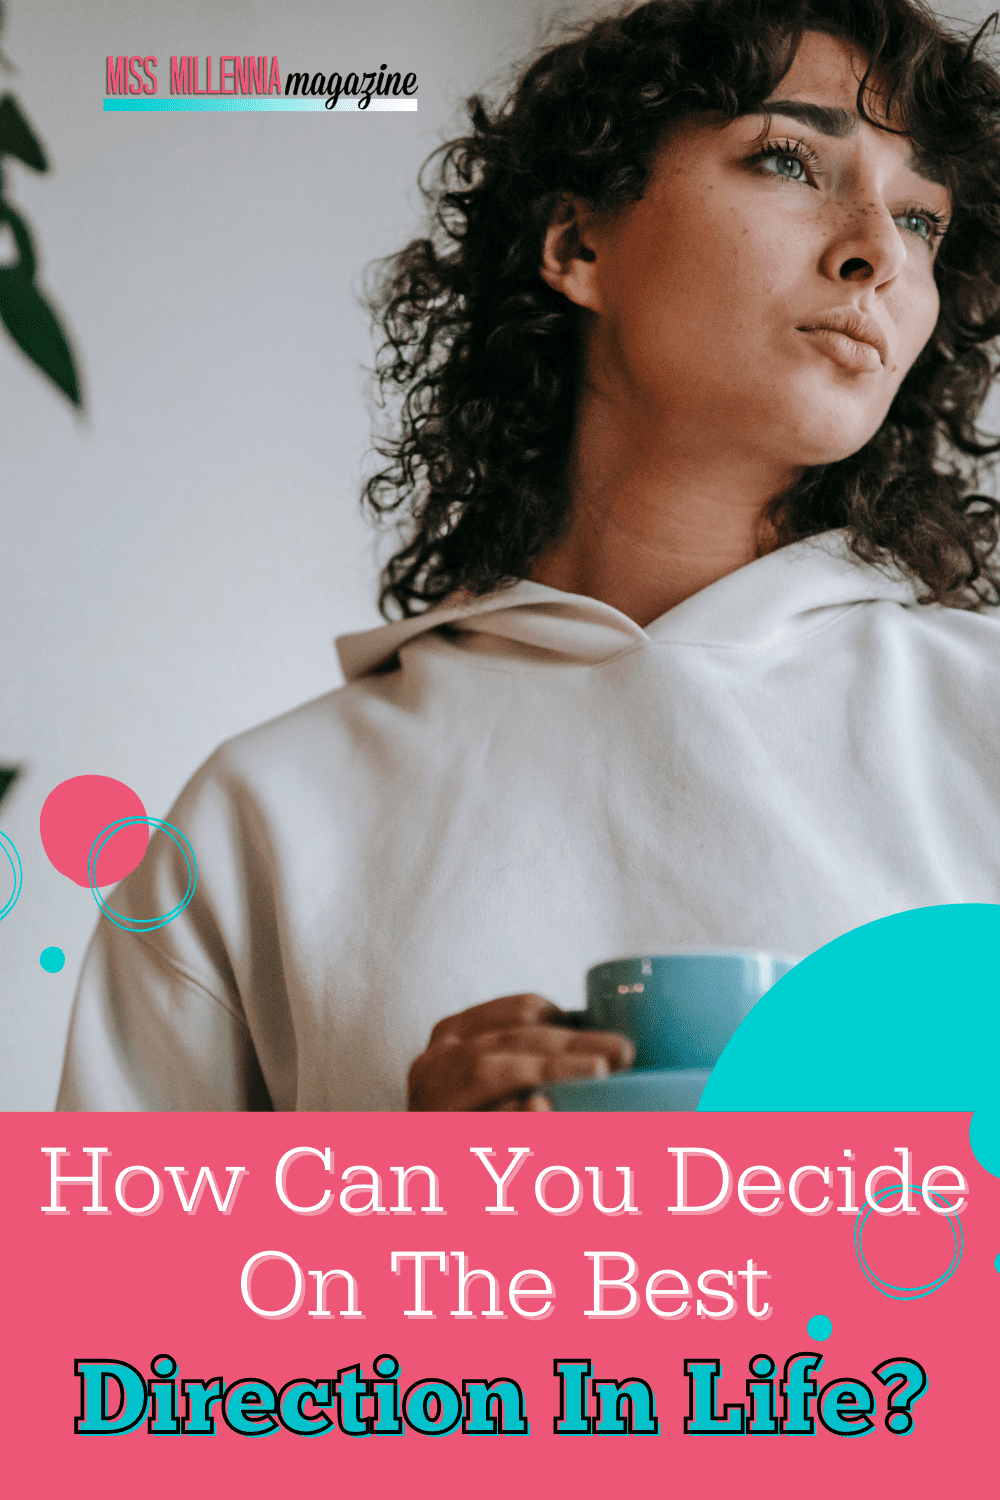 How Can You Decide On The Best Direction In Life?